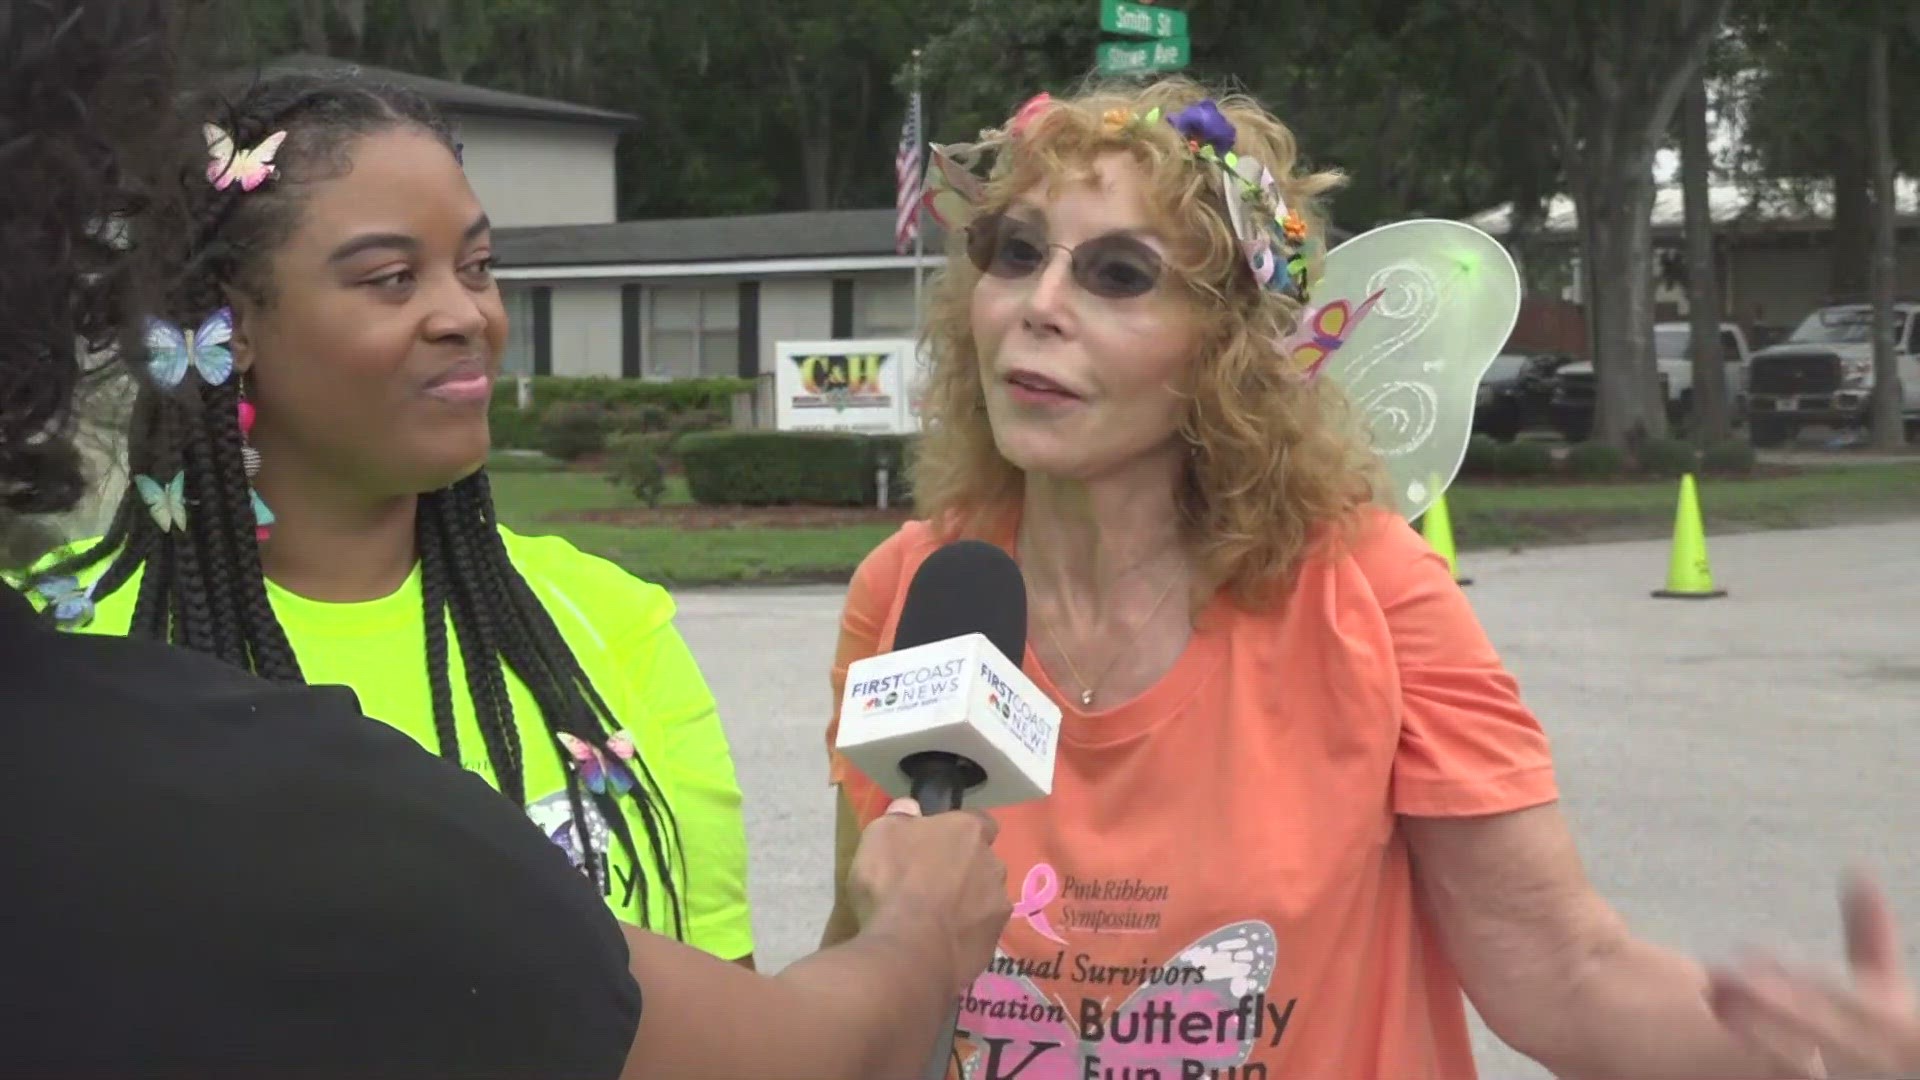 Over 300 people signed up for the event, which held a 5k and a one mile fun run. To kick off the event, organizer released butterflies into the sky.